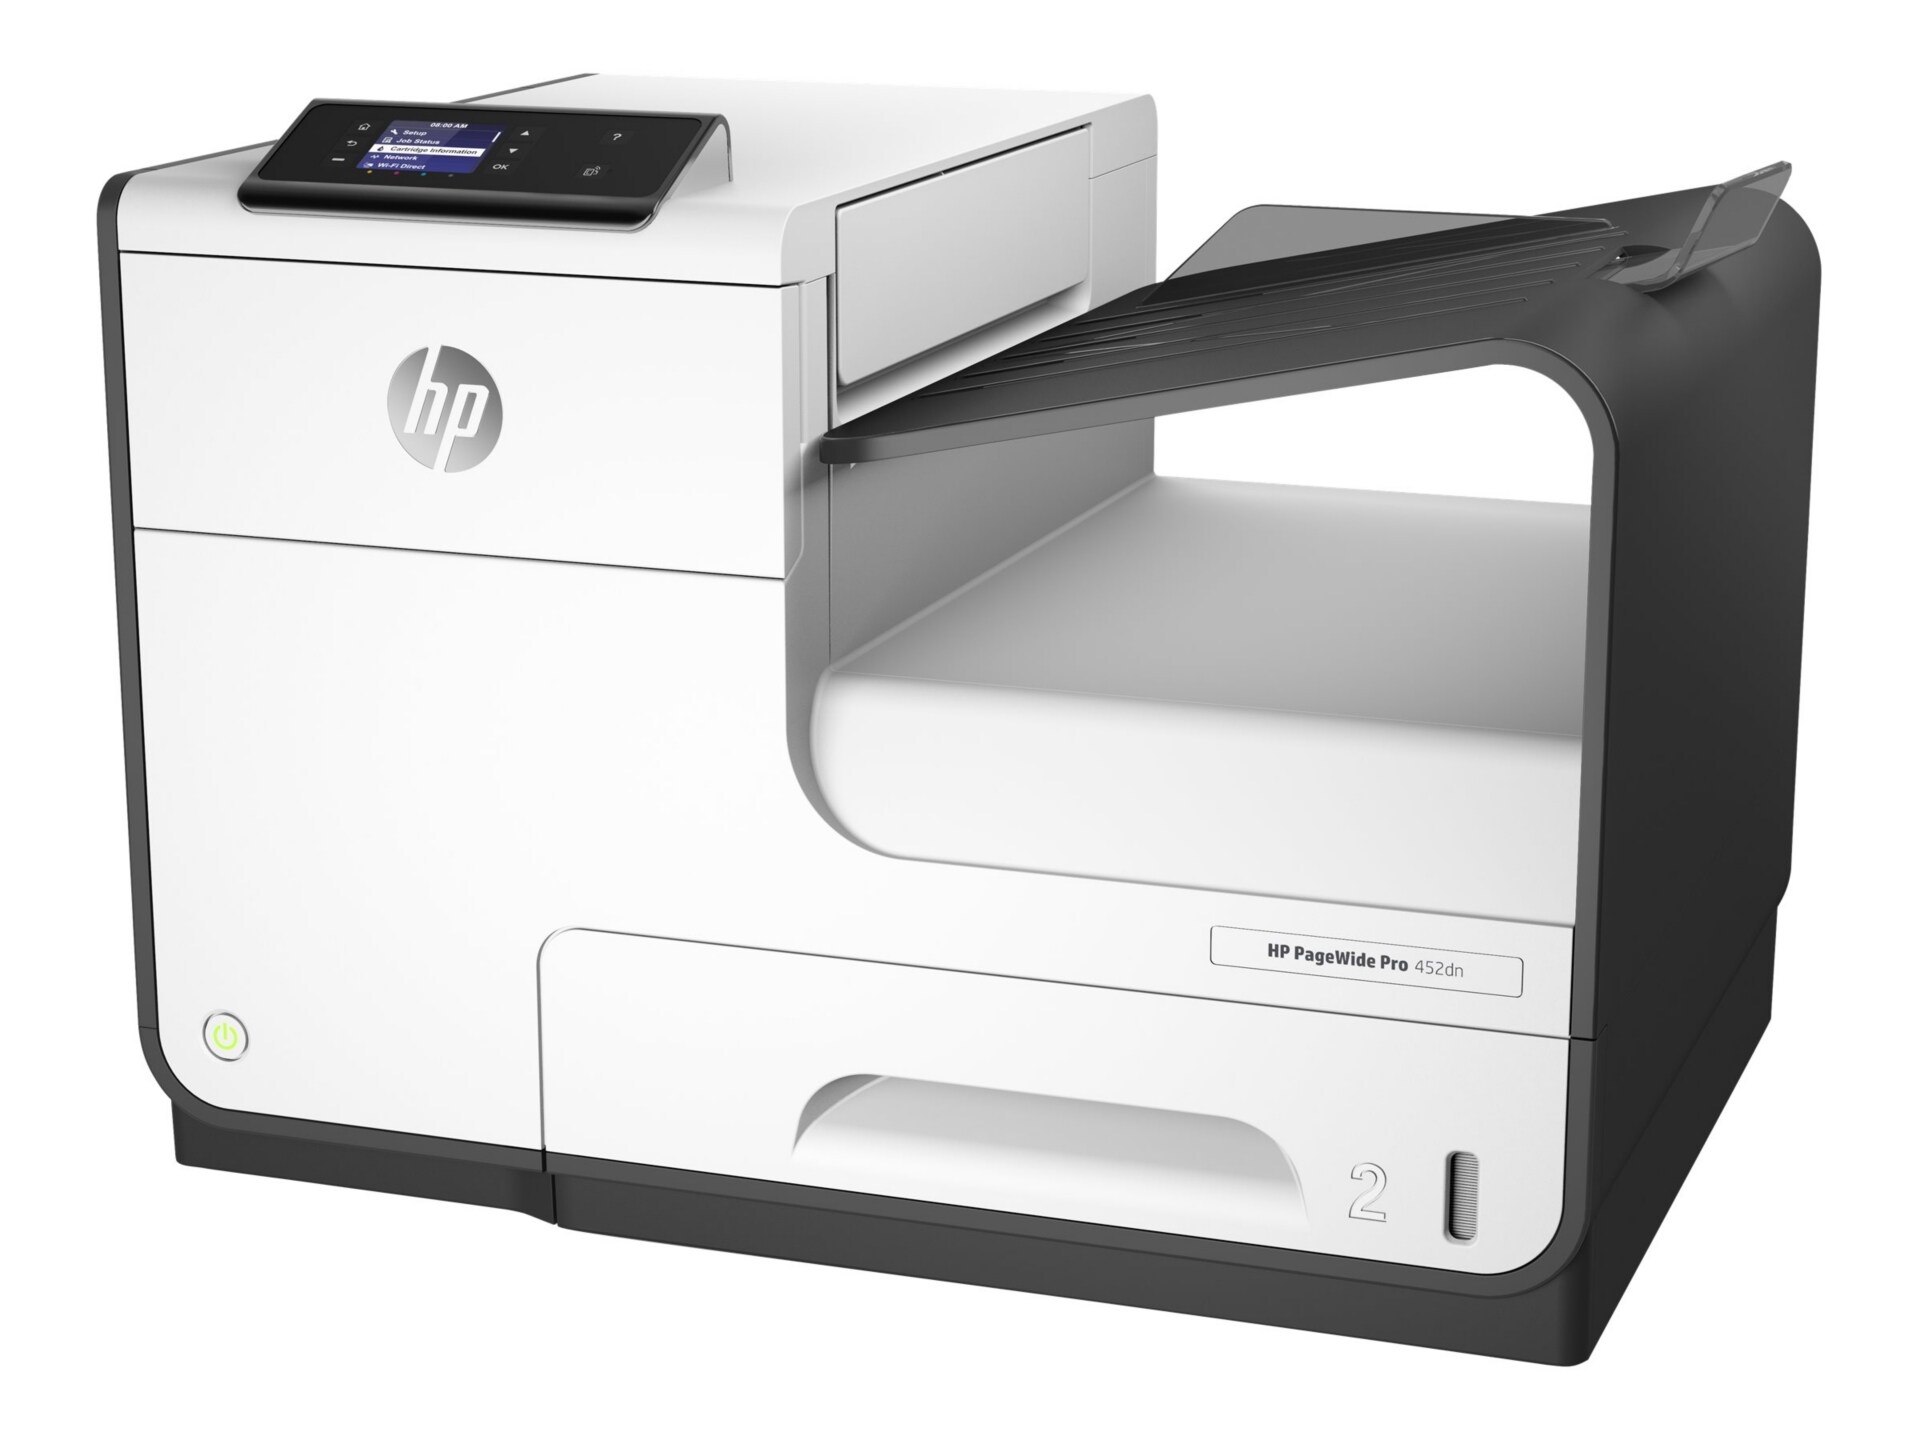 HP PageWide Pro 452dn
